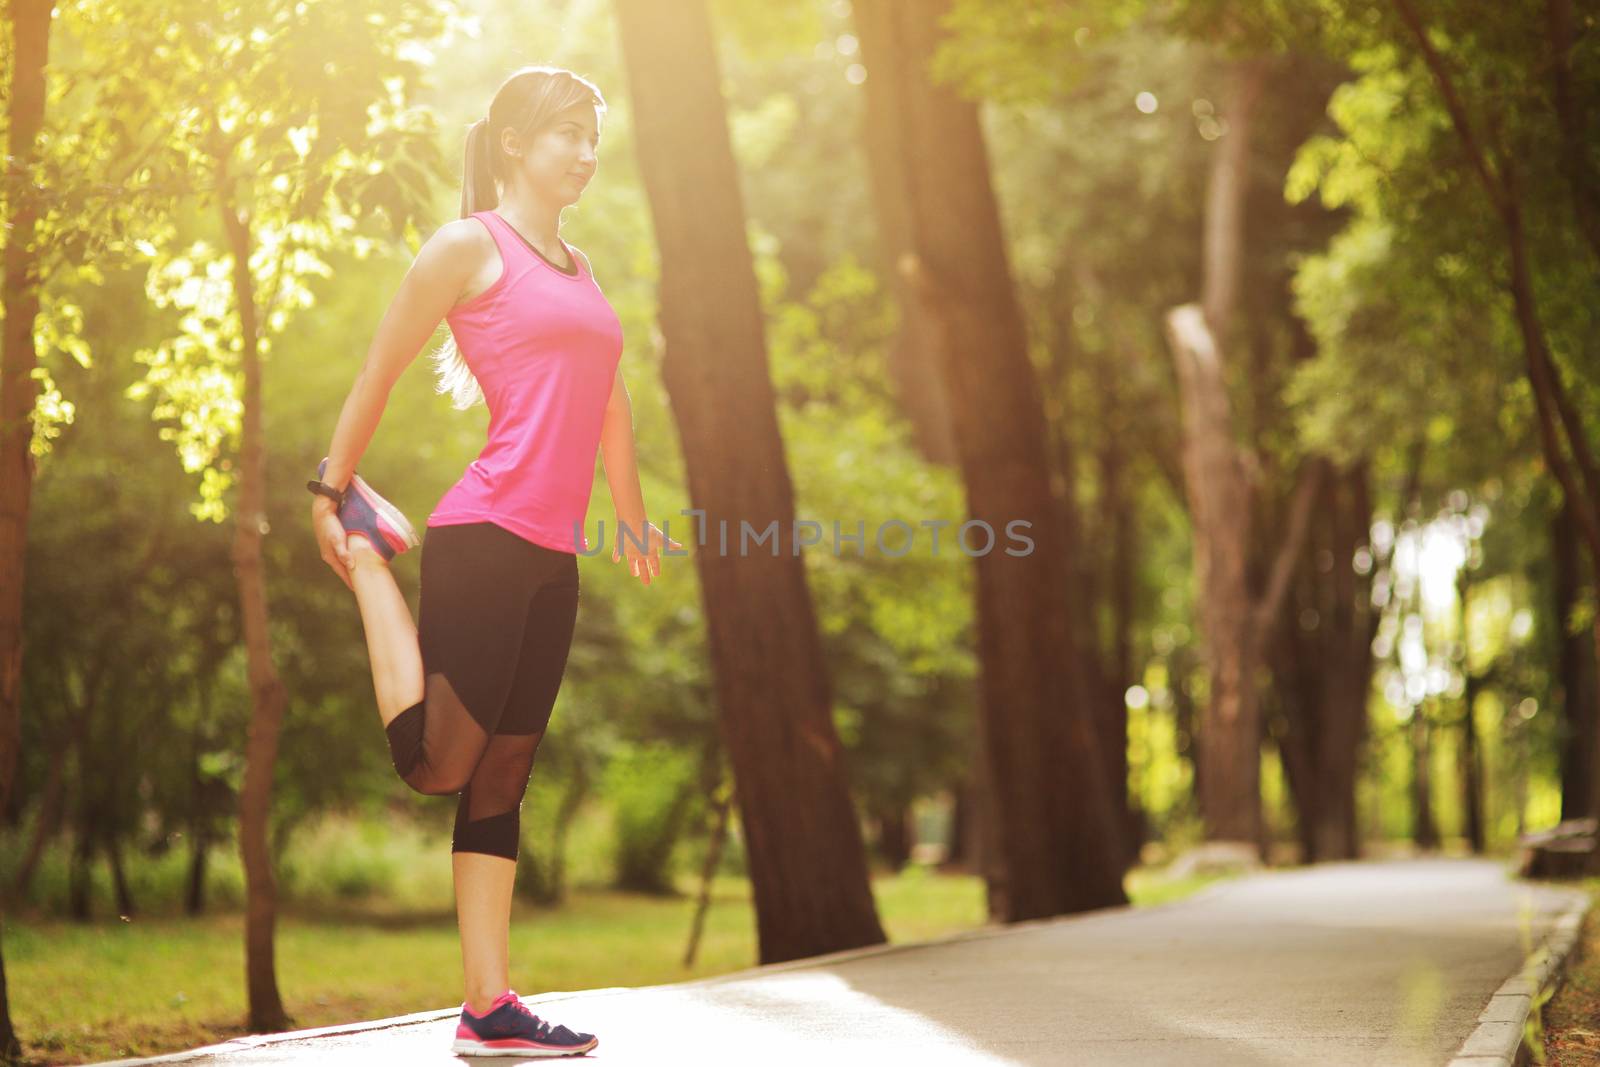 The young woman is engaged in sports fitness in nature forest Healthy fit living. Motivation healthy fit living. Running shoe. Beautiful sunlight. Woman warming up before running